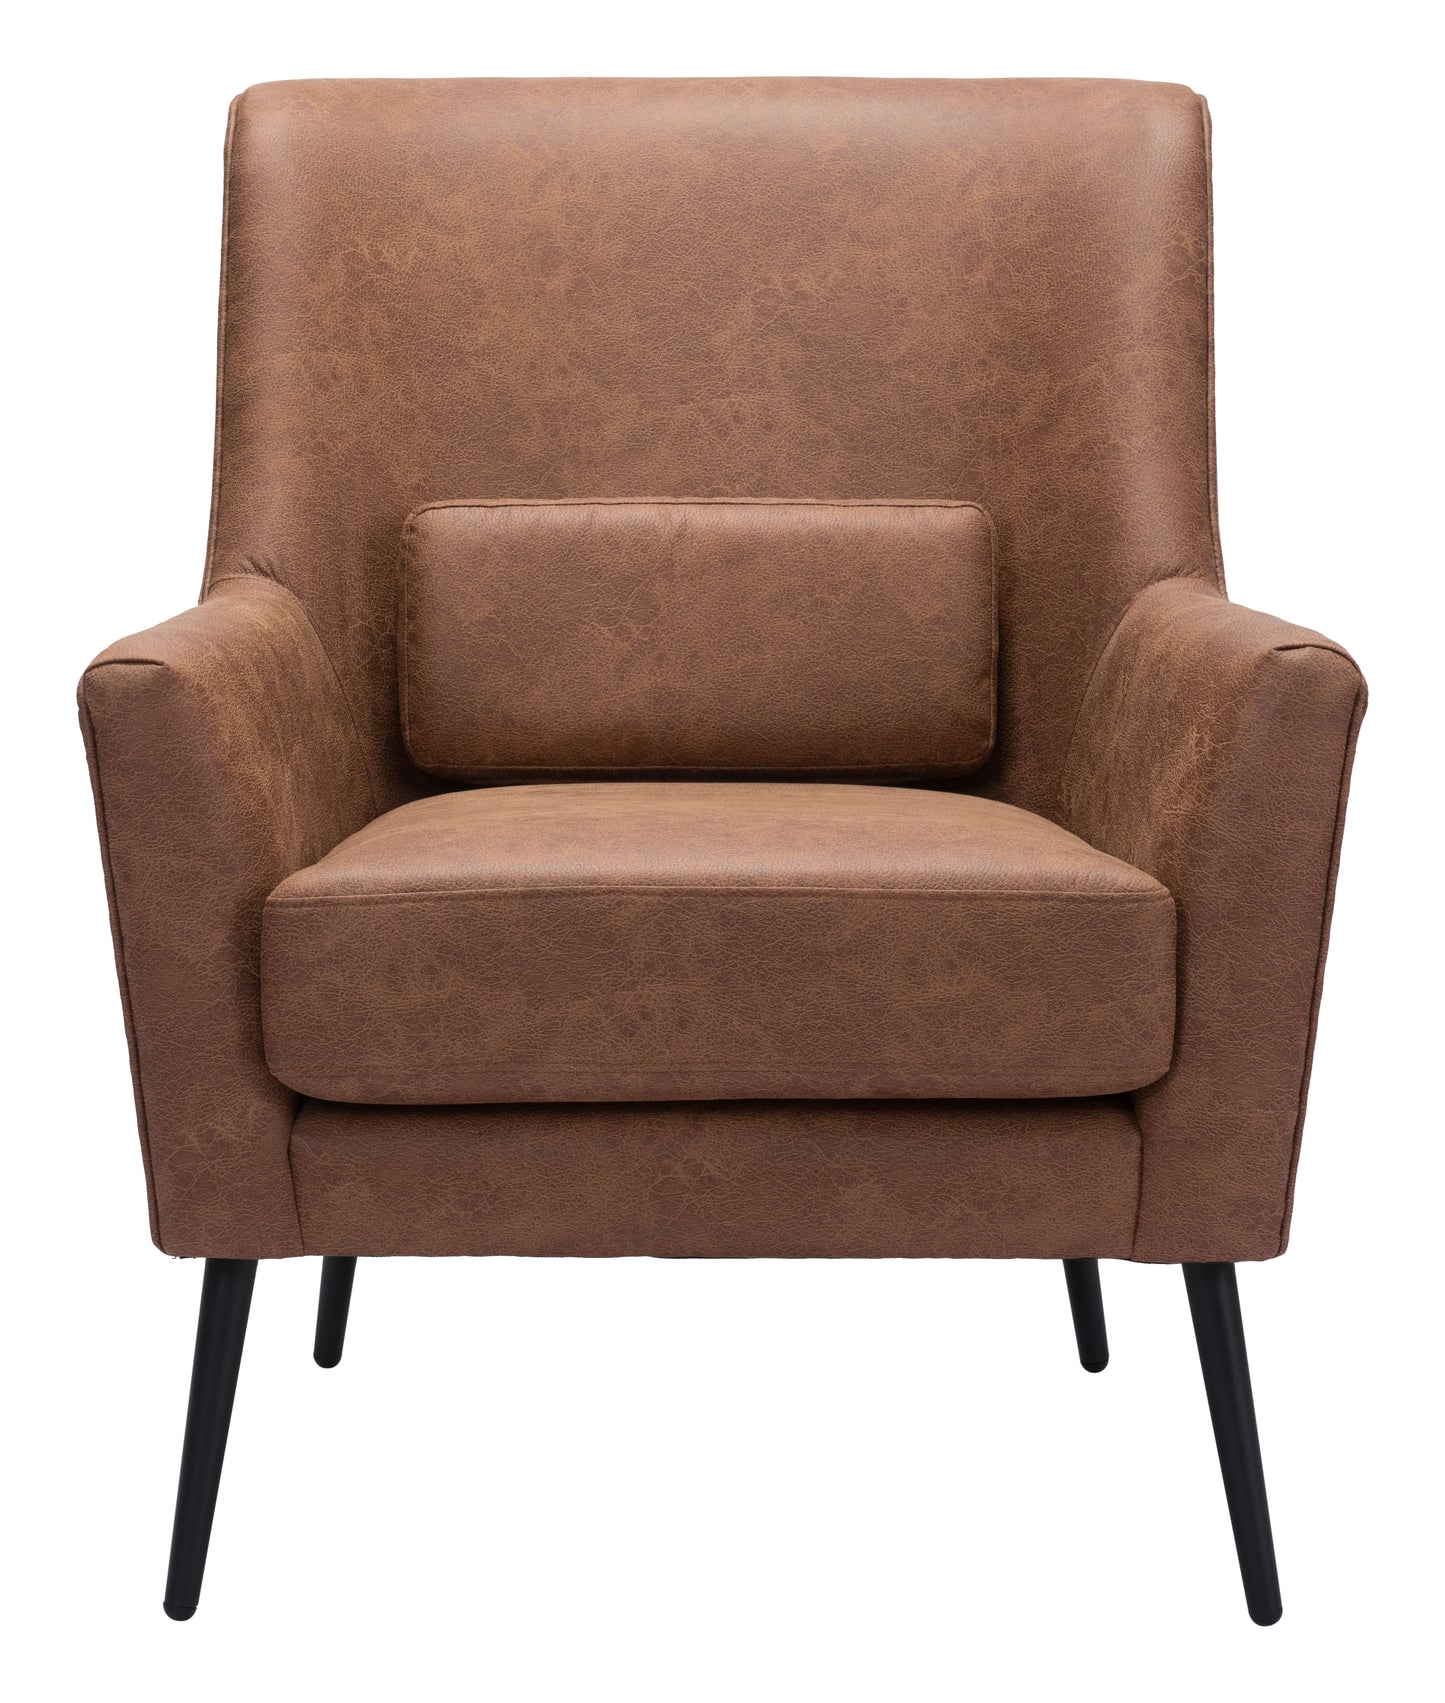 Ontario Accent Chair Vintage Brown